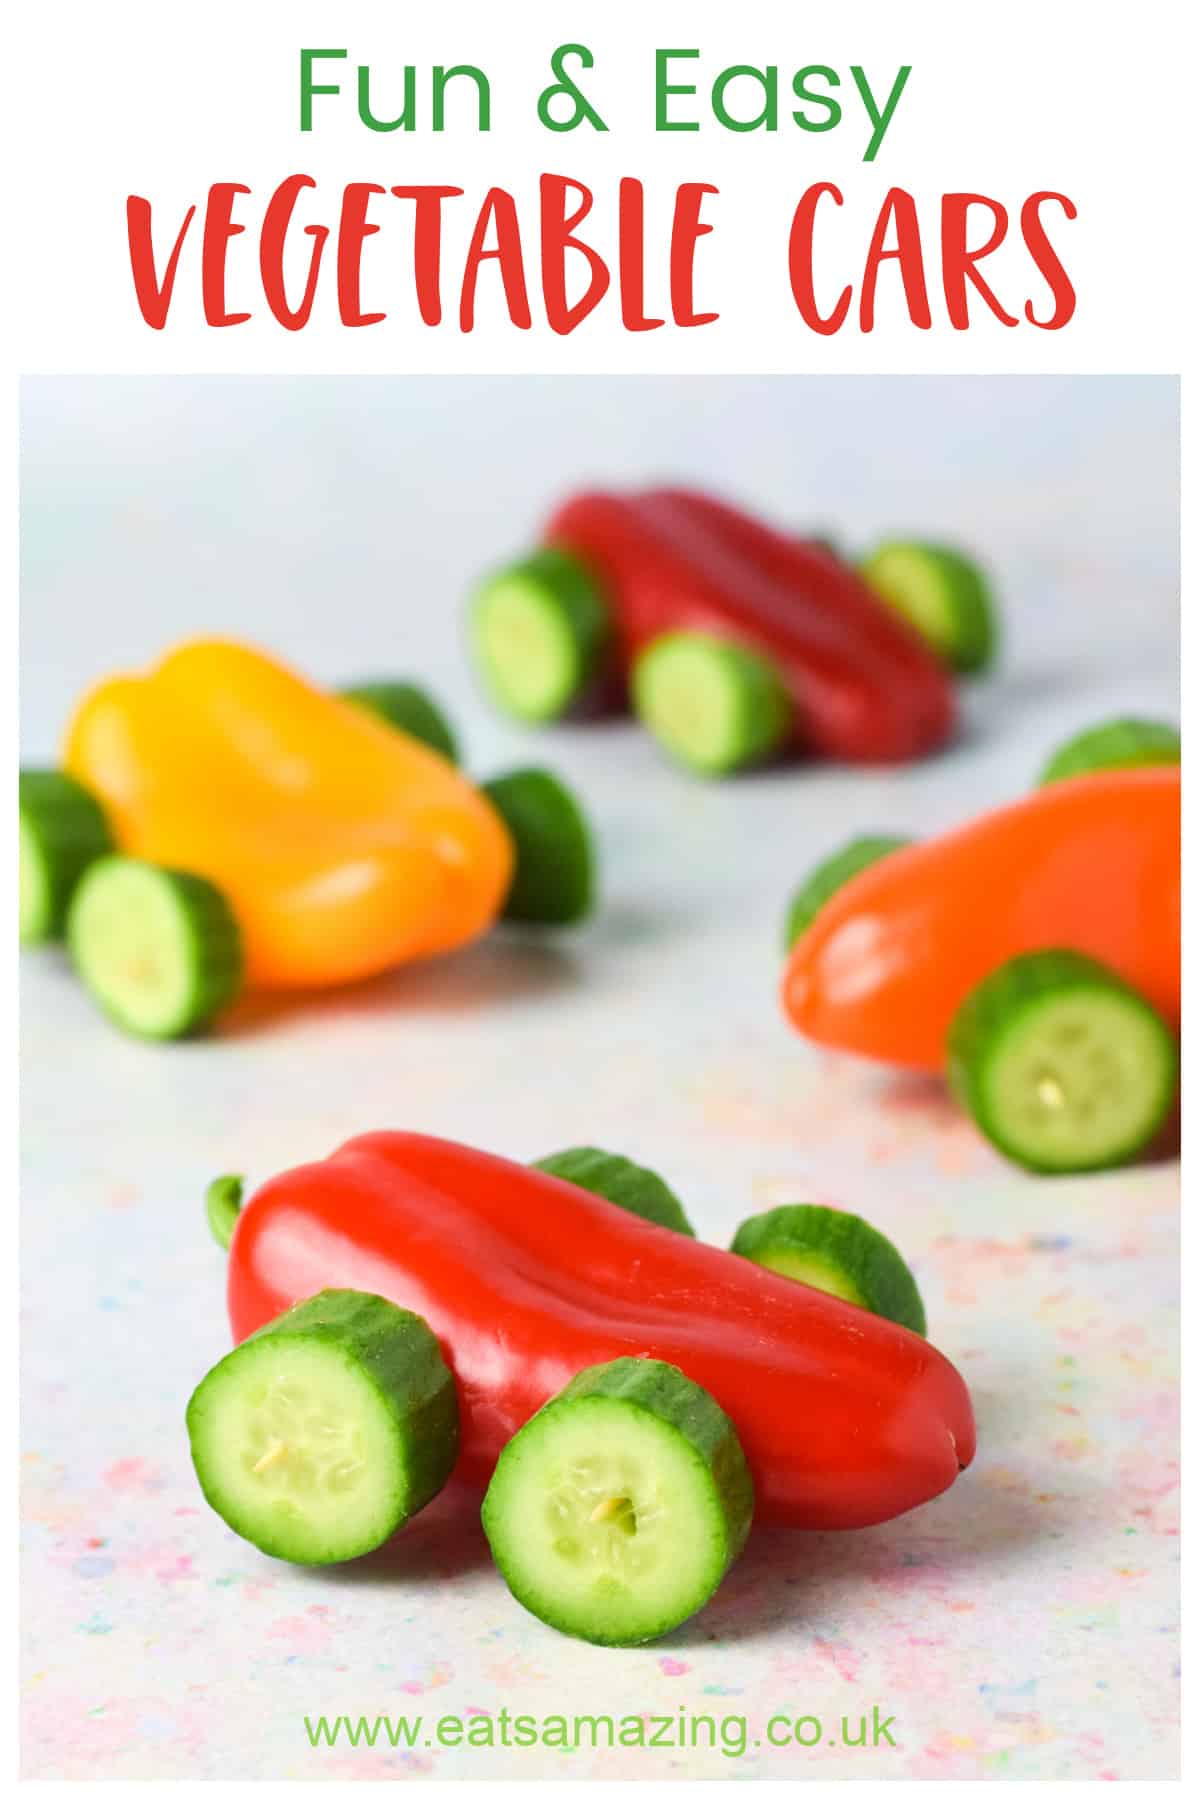 Fun and healthy vegetable cars recipe - great for car themed party food or after school snacks for kids